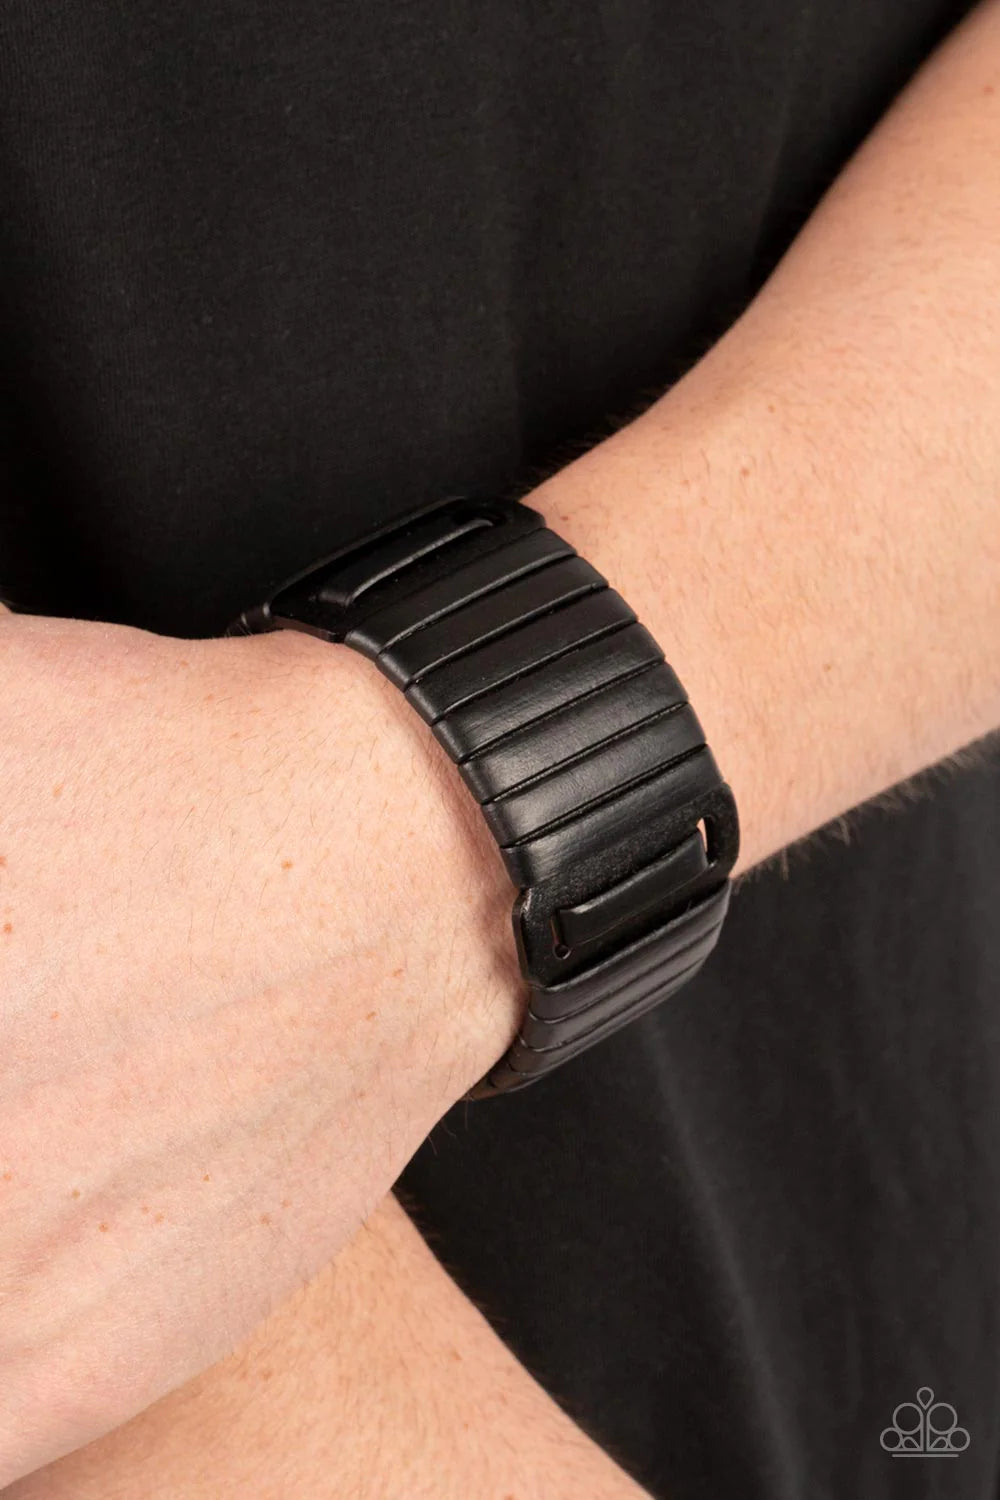 Paparazzi Accessories Leather Lumberyard - Black A black leather lace is wrapped around and through a thick black leather band, resulting in a rugged centerpiece around the wrist. Features an adjustable snap closure. Sold as one individual bracelet.